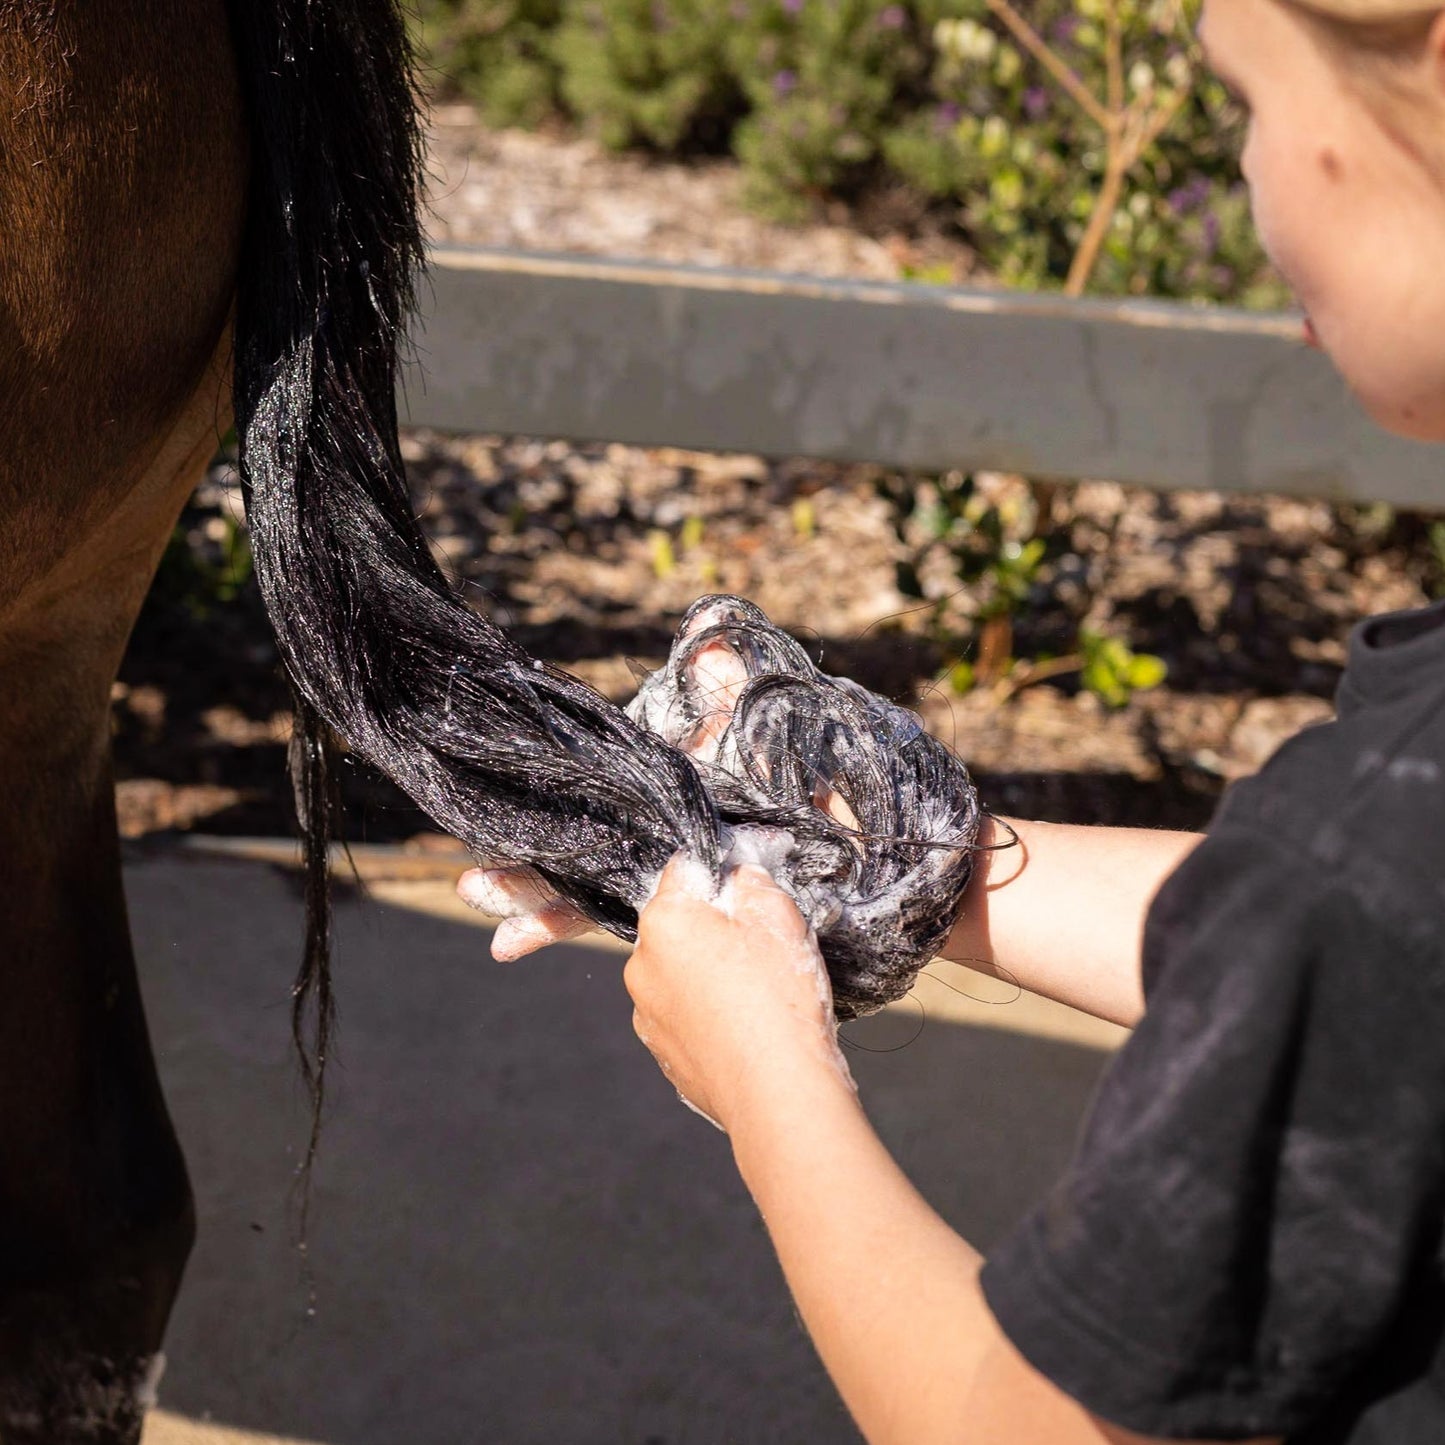 The shampoo being used on a horse's tail